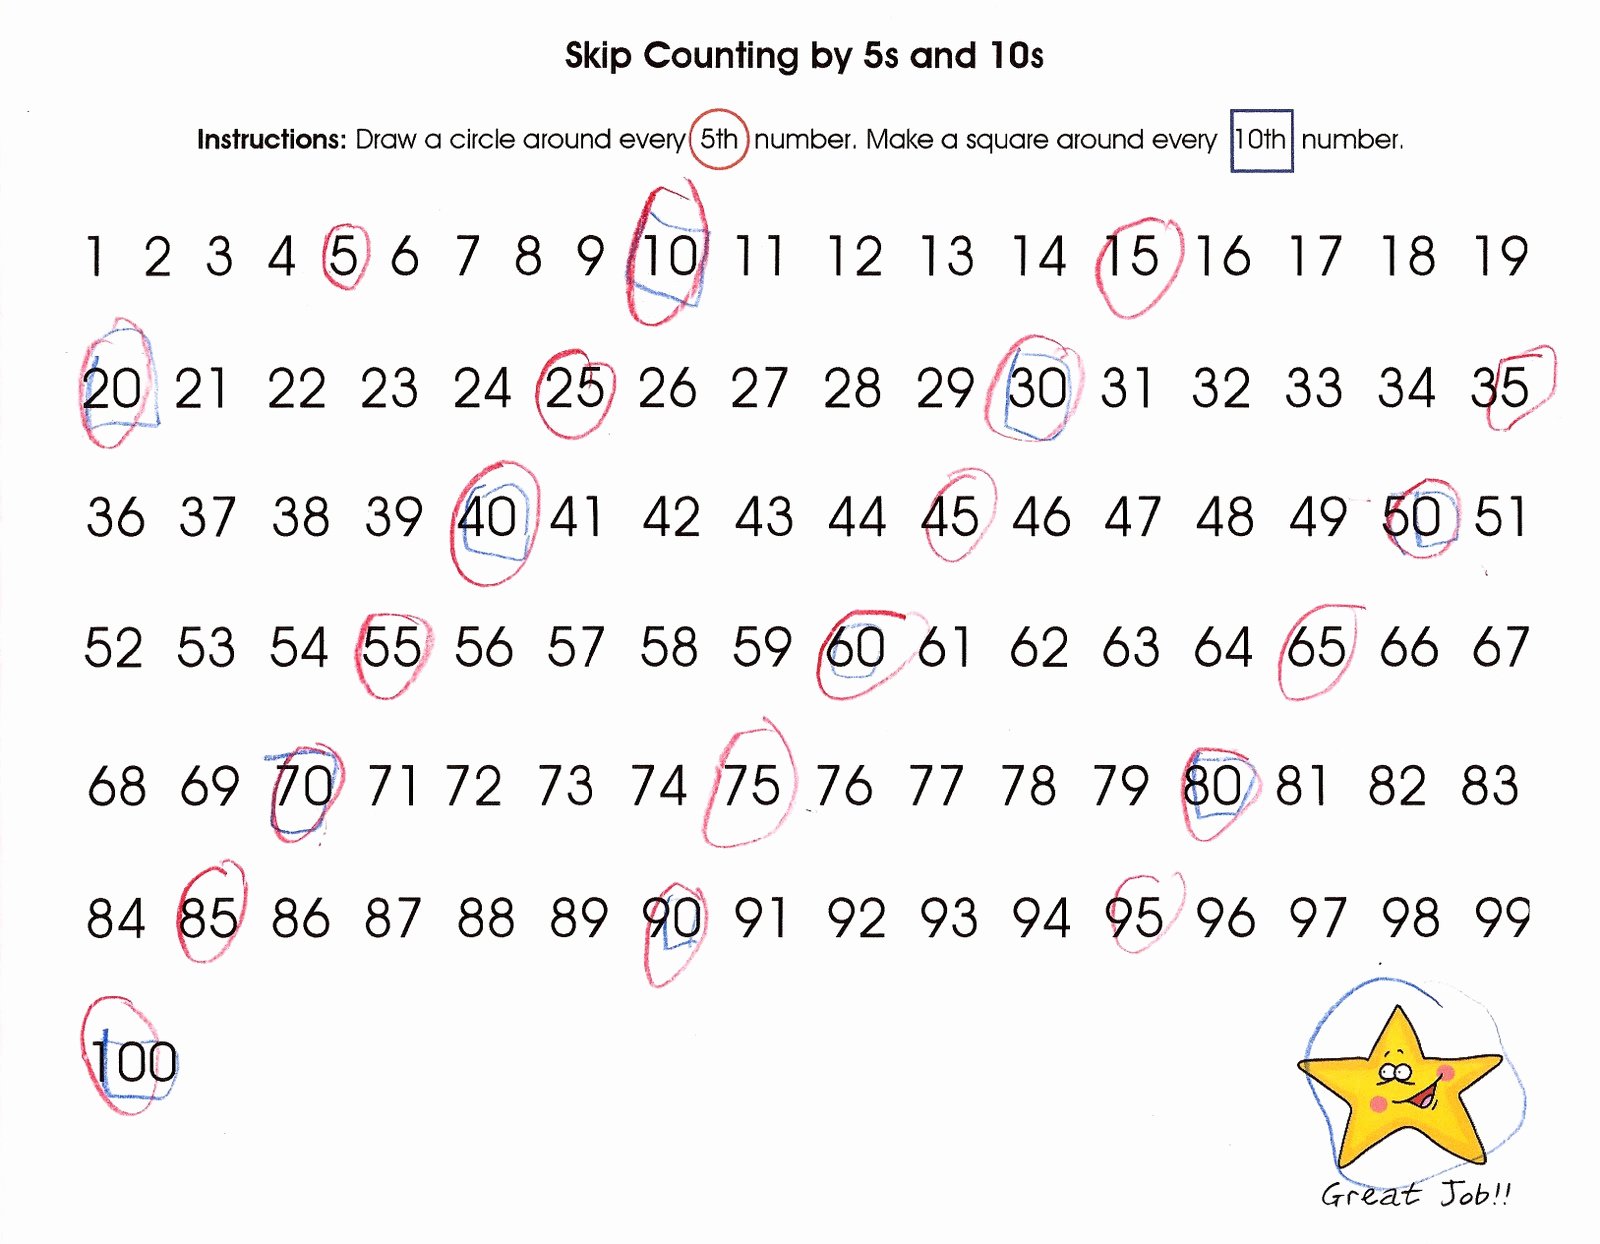 Counting In 10s Worksheet Unique Relentlessly Fun Deceptively Educational Skip Counting